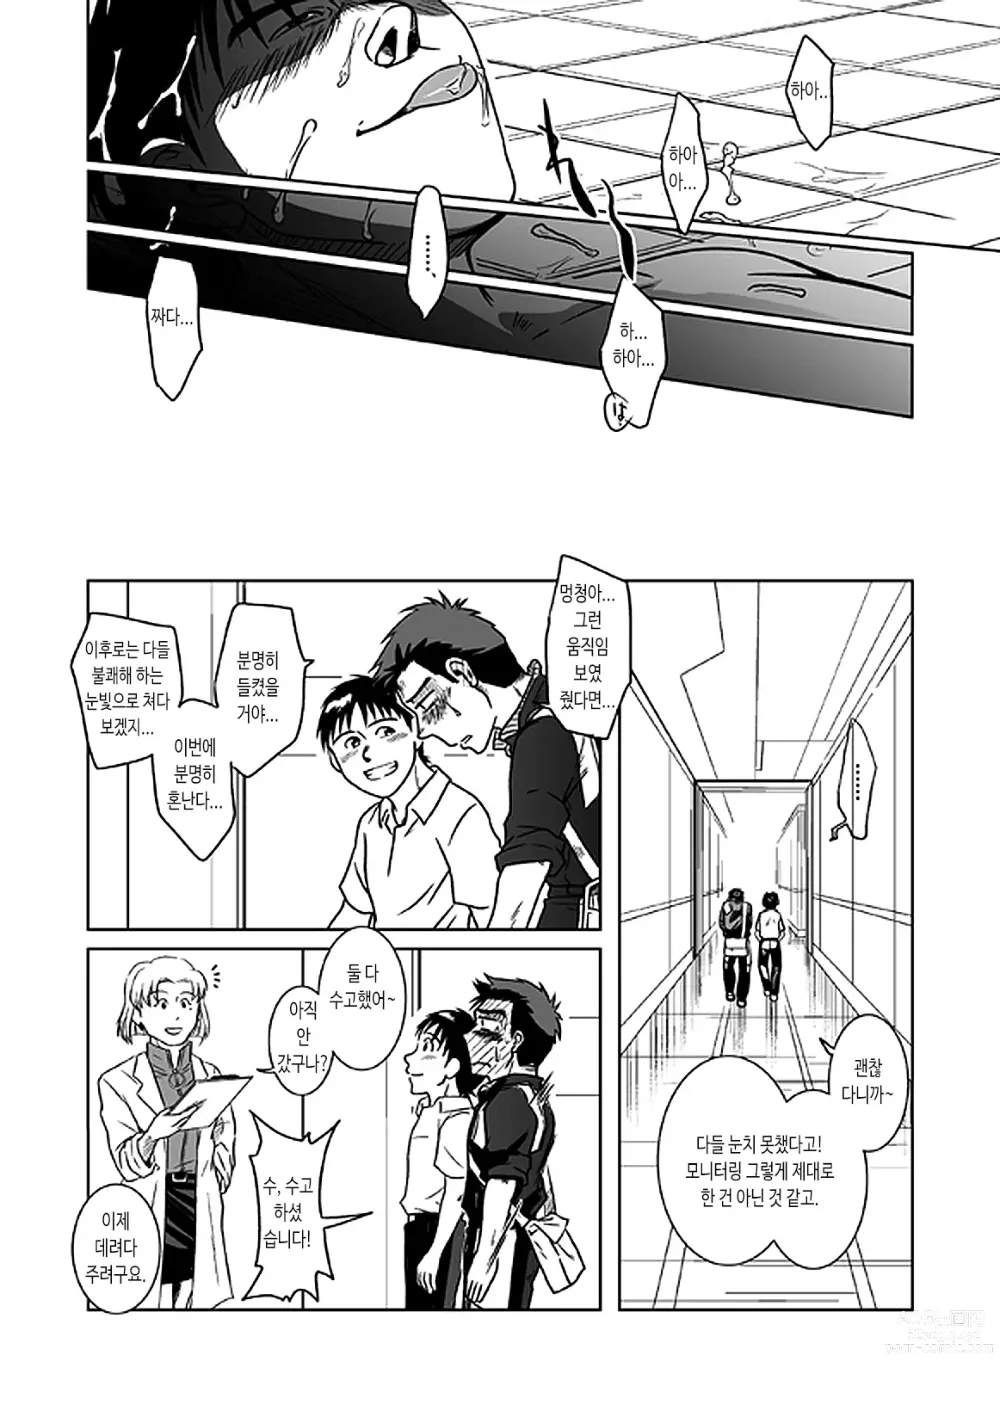 Page 42 of doujinshi 스즈하라 능욕